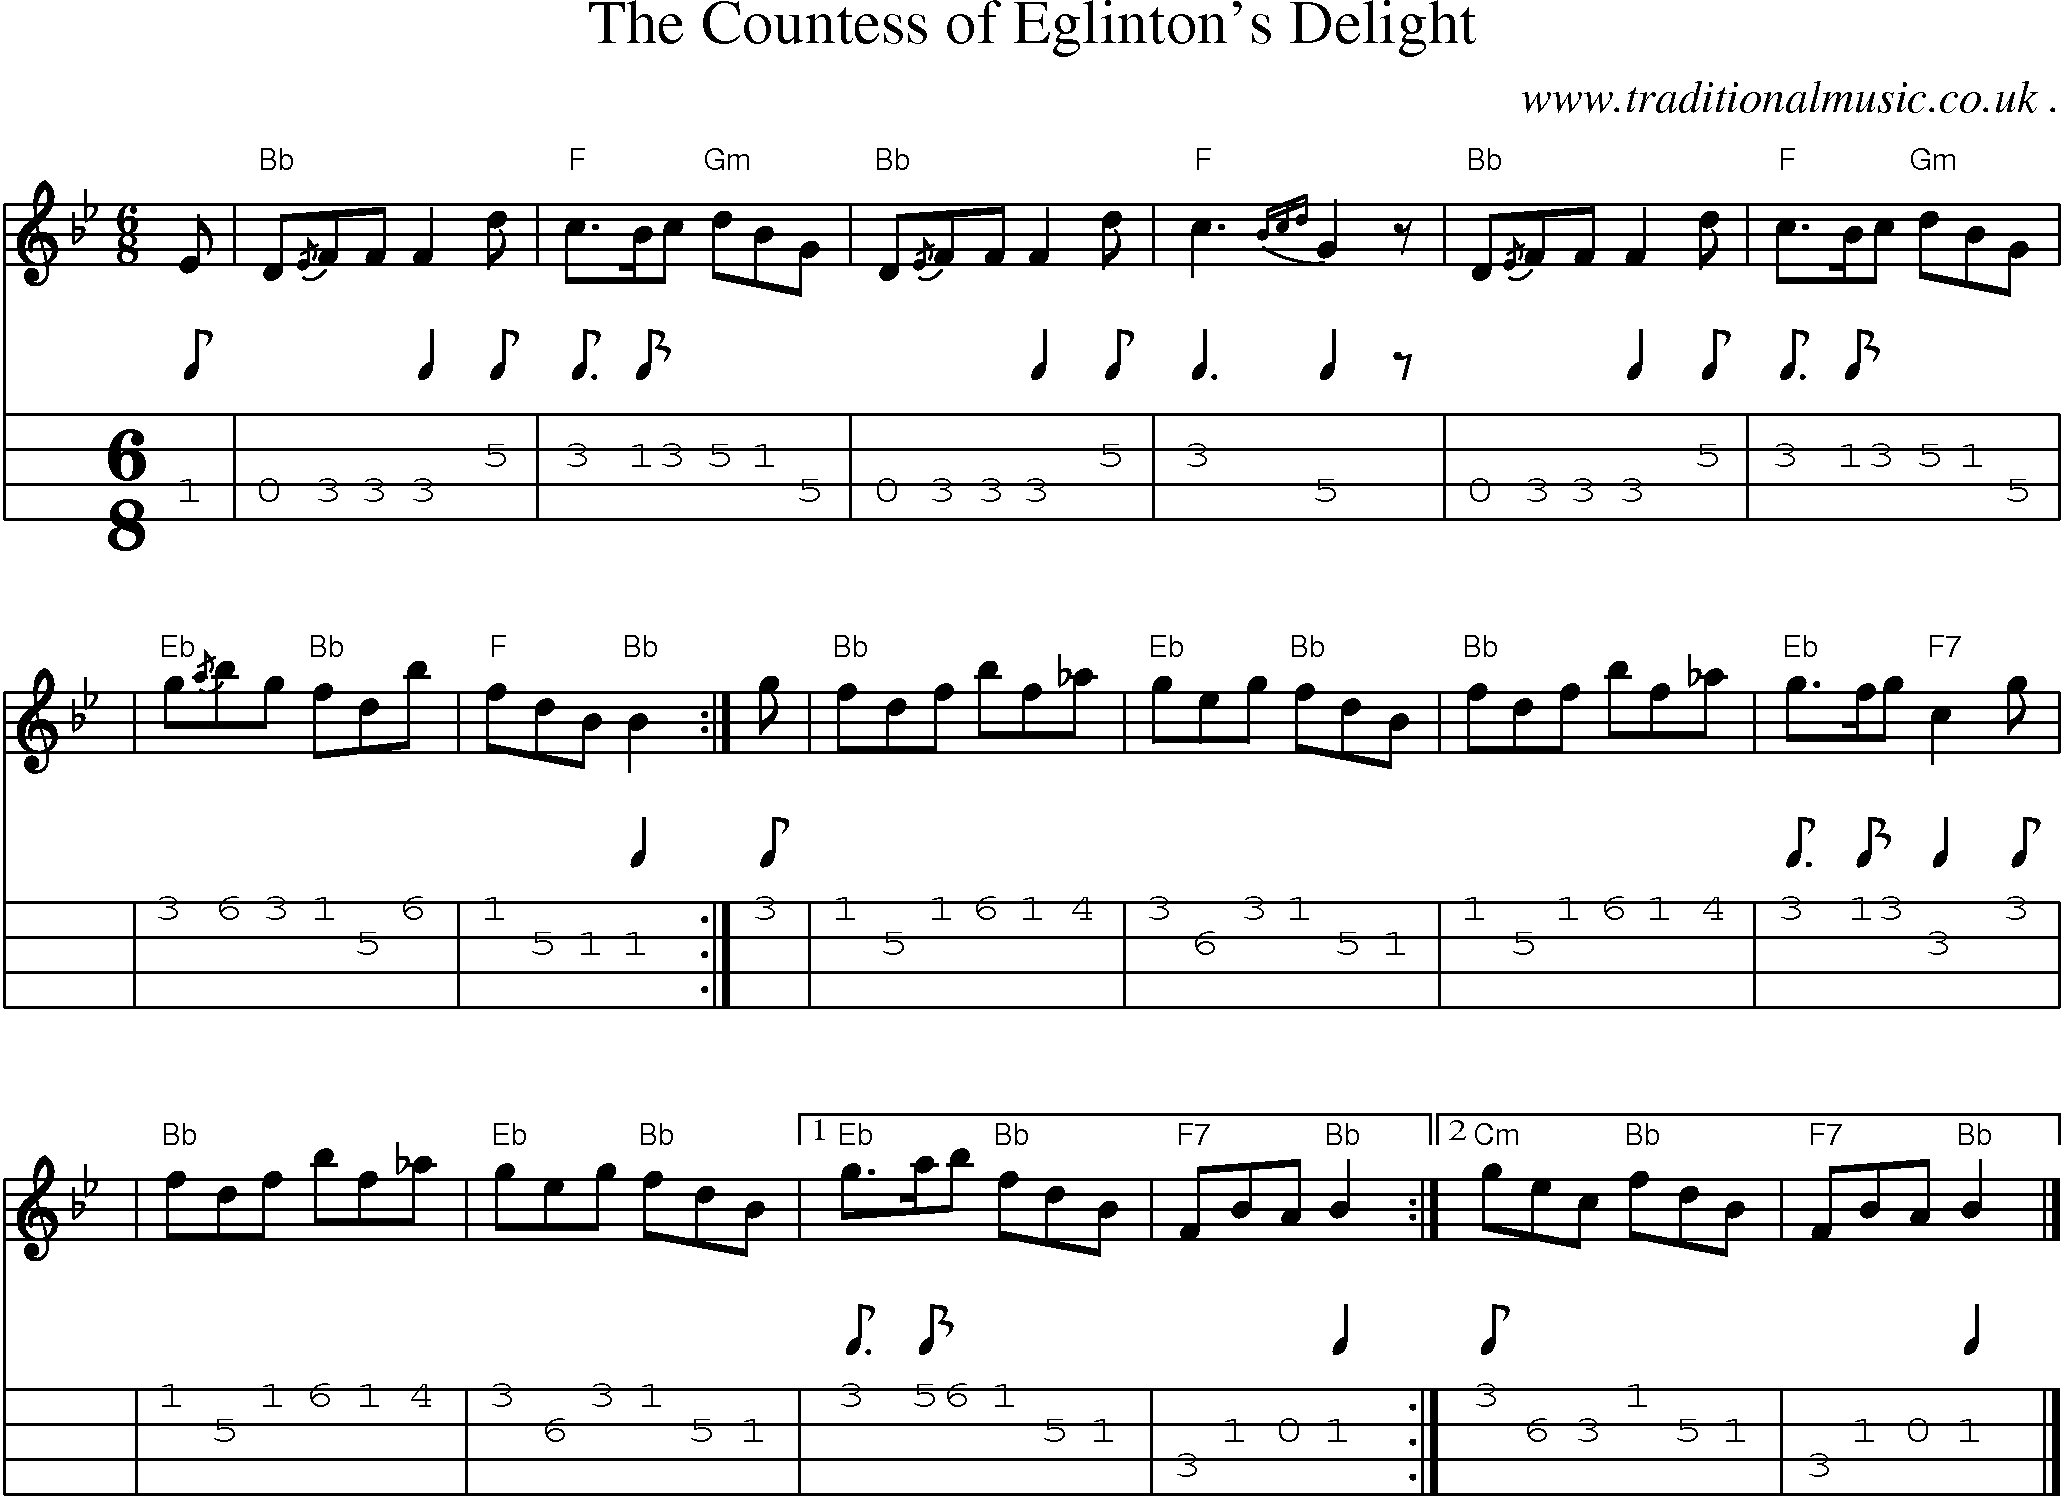 Sheet-music  score, Chords and Mandolin Tabs for The Countess Of Eglintons Delight